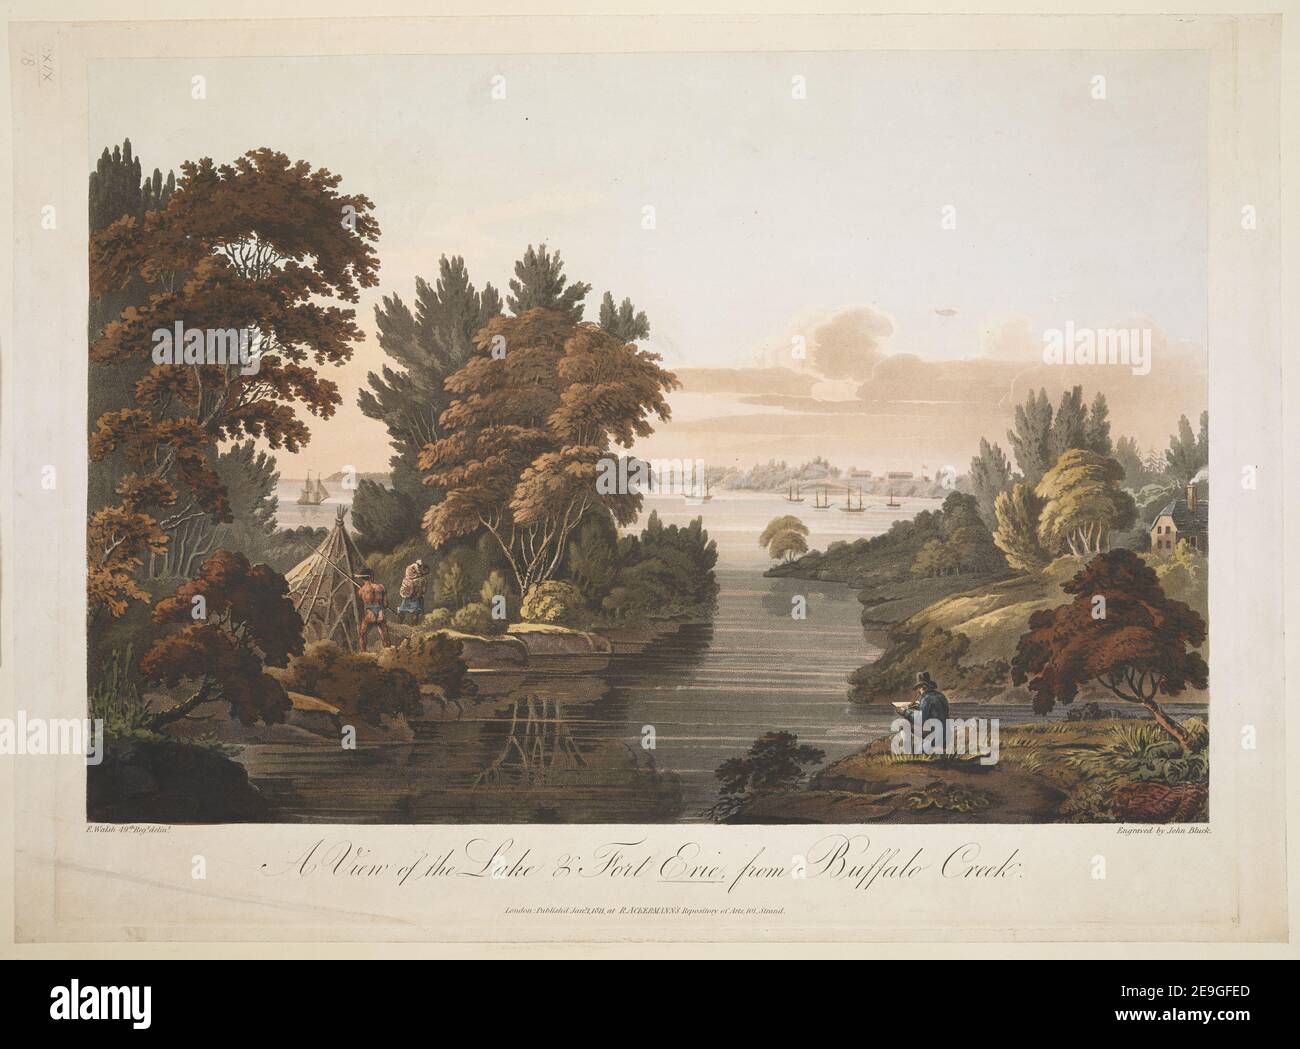 A View of the Lake & Fort Erie from Buffalo Creek.  Author  Bluck, John 119.18. Place of publication: London Publisher: Publish'd Jany 1 1811 at R. ACKERMANN'S Repository of Arts 101 Stratnd, Date of publication: [January 1 1811]  Item type: 1 print Medium: aquatint and etching with hand-colouring Dimensions: platemark 41.9 x 55 cm, on sheet 42.8 x 59.1 cm  Former owner: George III, King of Great Britain, 1738-1820 Stock Photo